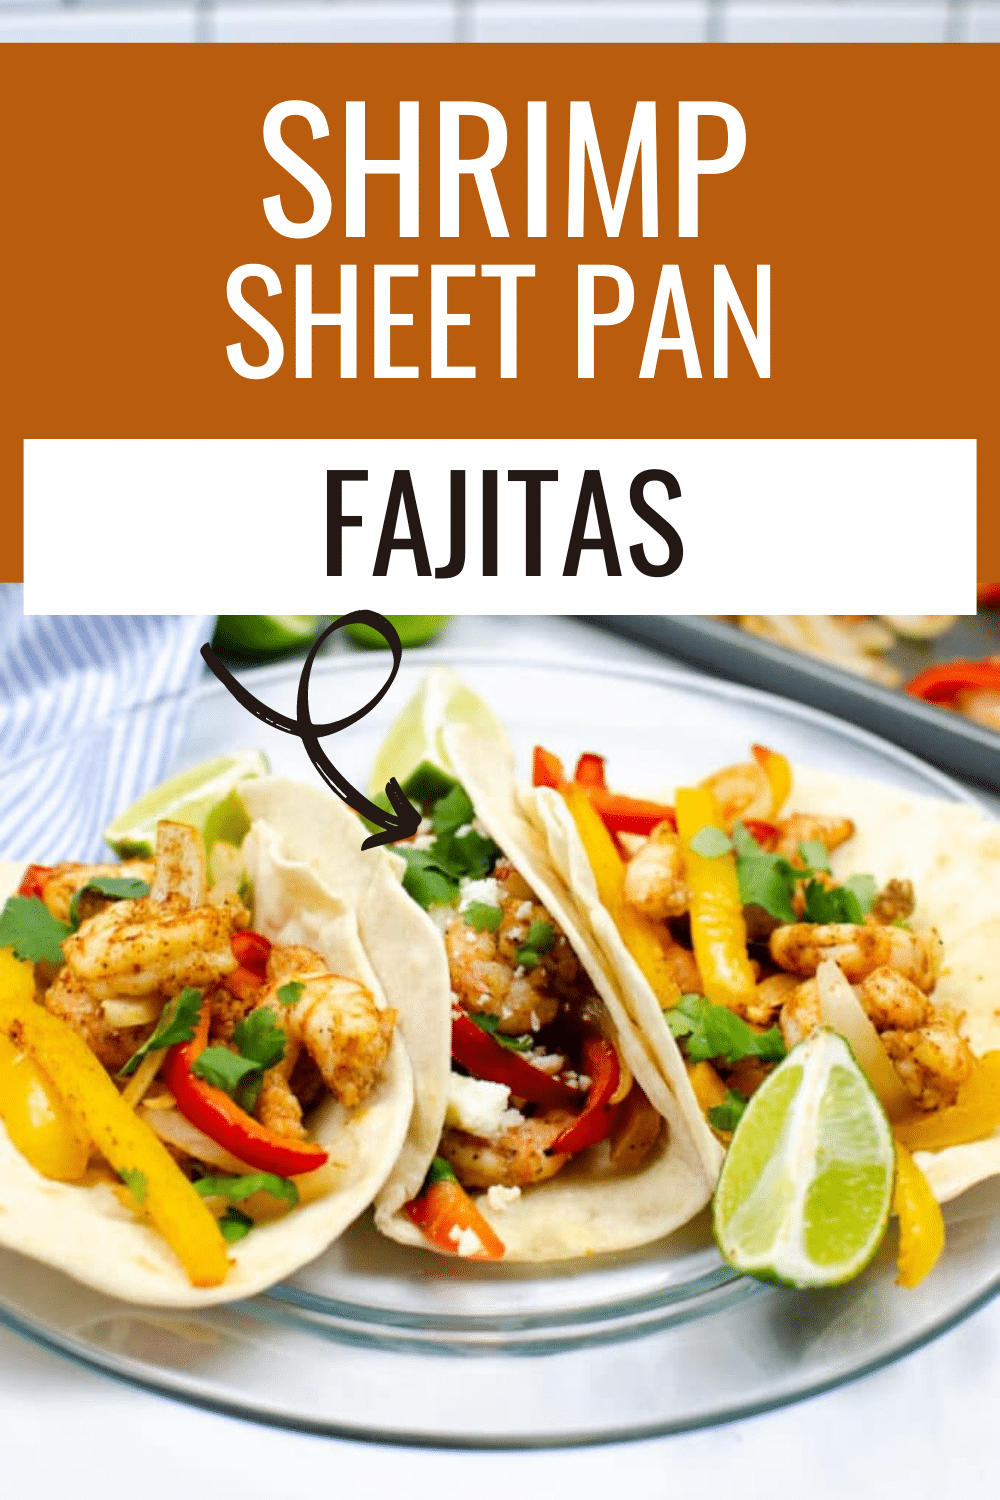 Shrimp Sheet Pan Fajitas Recipe in a glass circle plate with slice of lime on the side with a title text reading Shrimp Sheet Pan Fajitas